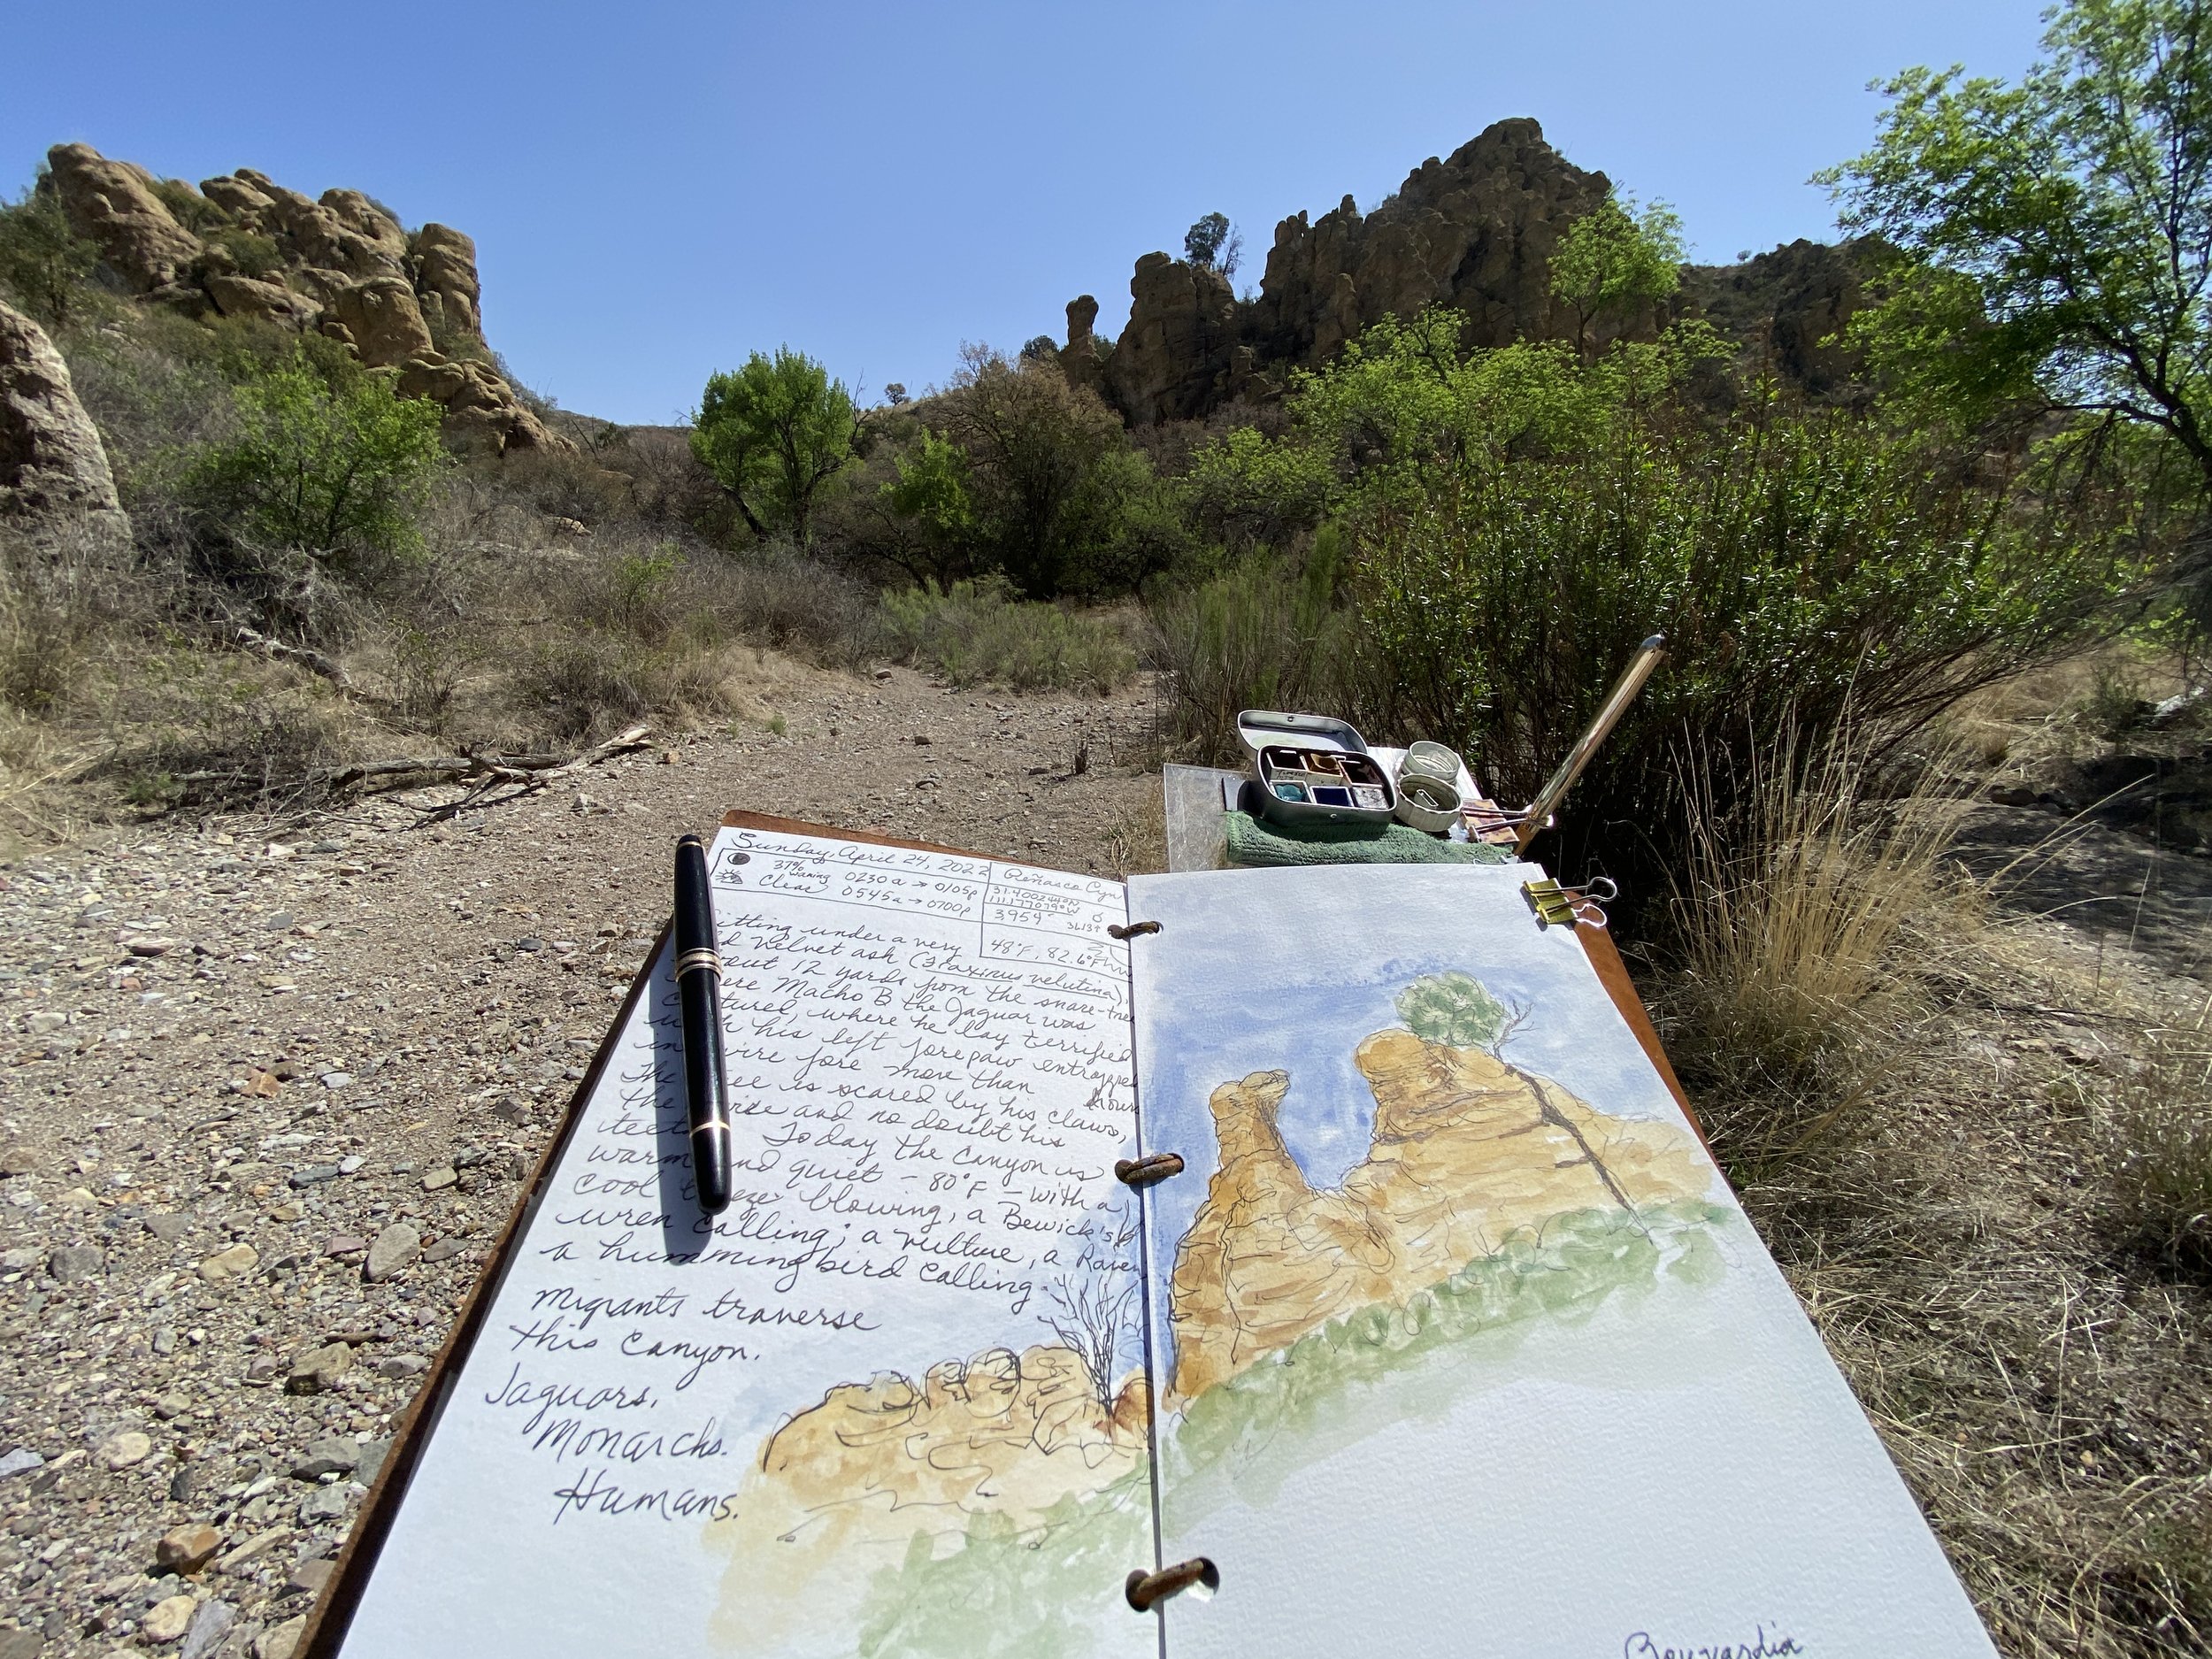 Sketching the entry to the canyon where the snare tree sits by the trail.